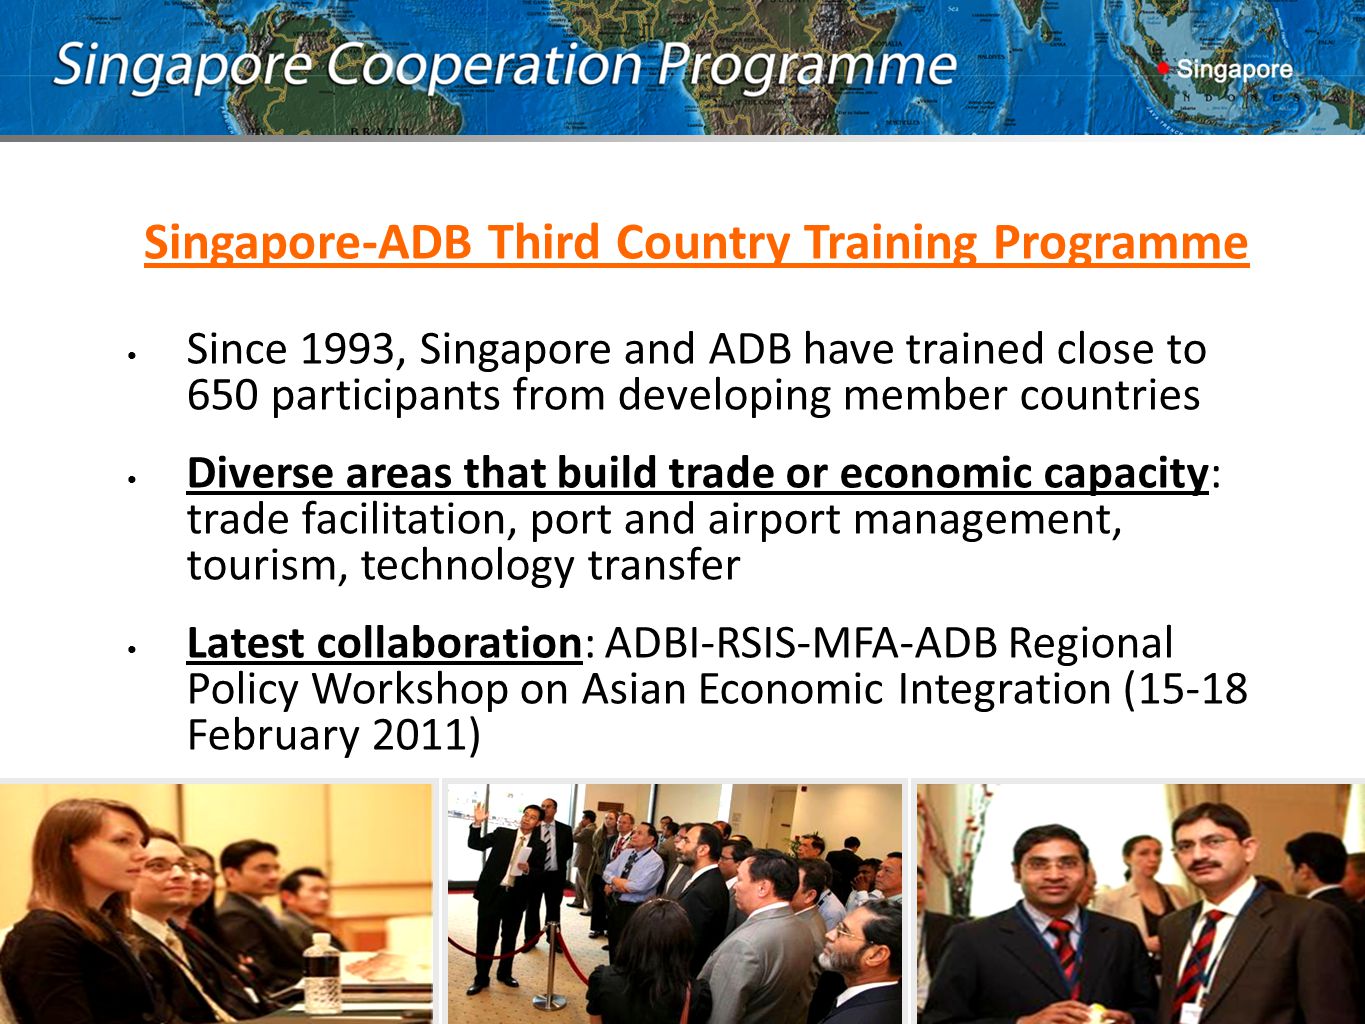 Singapore-ADB Third Country Training Programme Since 1993, Singapore and ADB have trained close to 650 participants from developing member countries Diverse areas that build trade or economic capacity: trade facilitation, port and airport management, tourism, technology transfer Latest collaboration: ADBI-RSIS-MFA-ADB Regional Policy Workshop on Asian Economic Integration (15-18 February 2011)